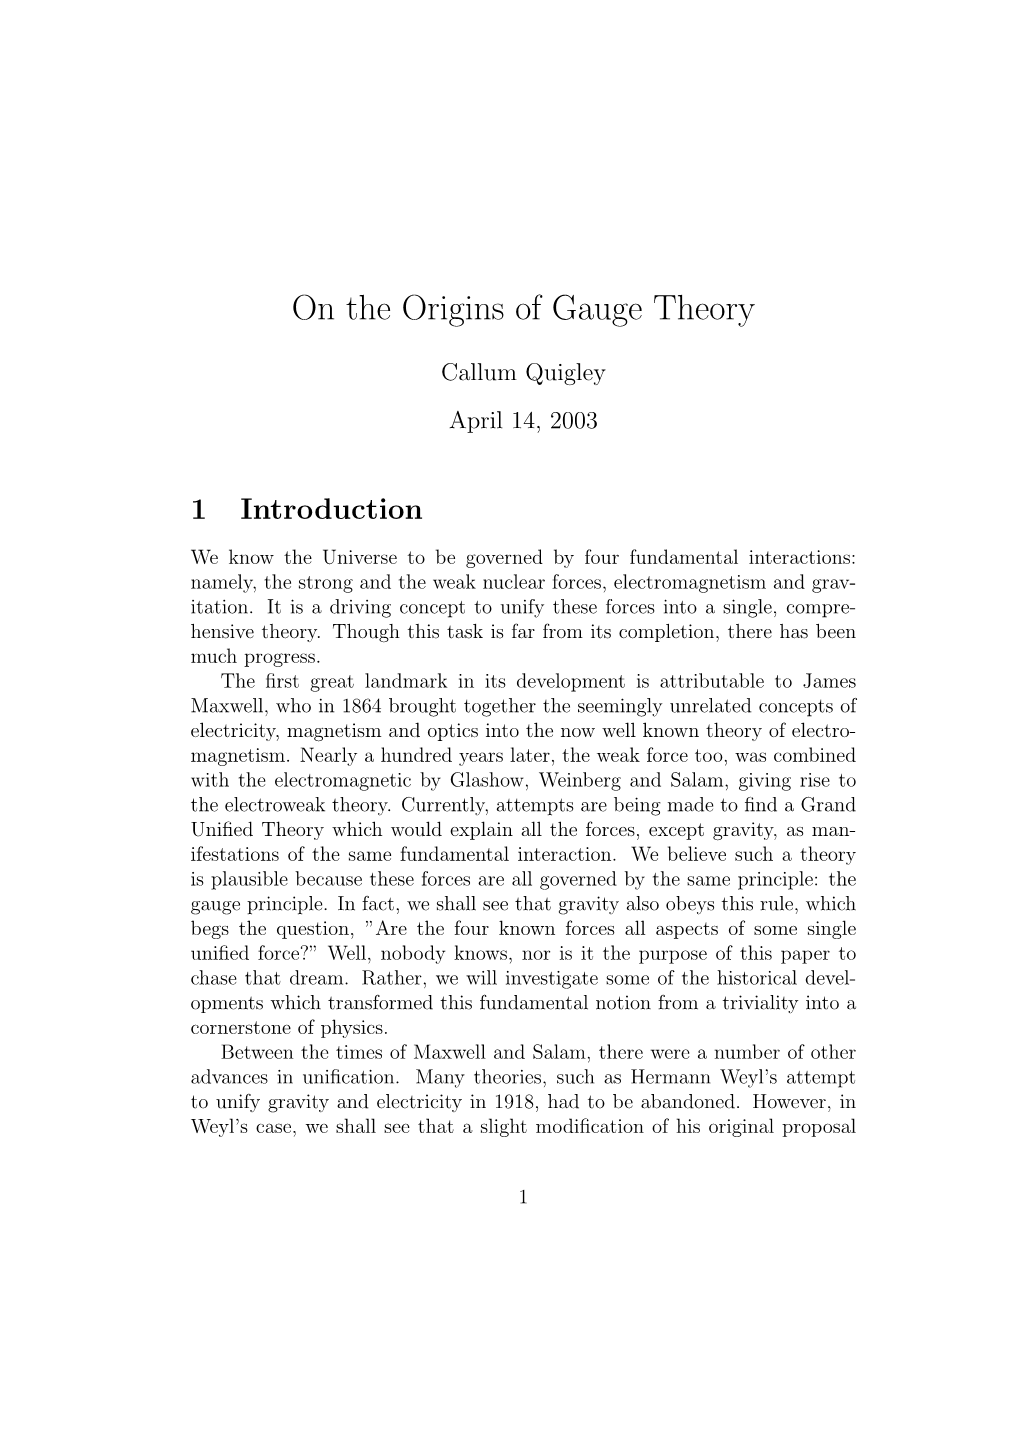 On the Origins of Gauge Theory